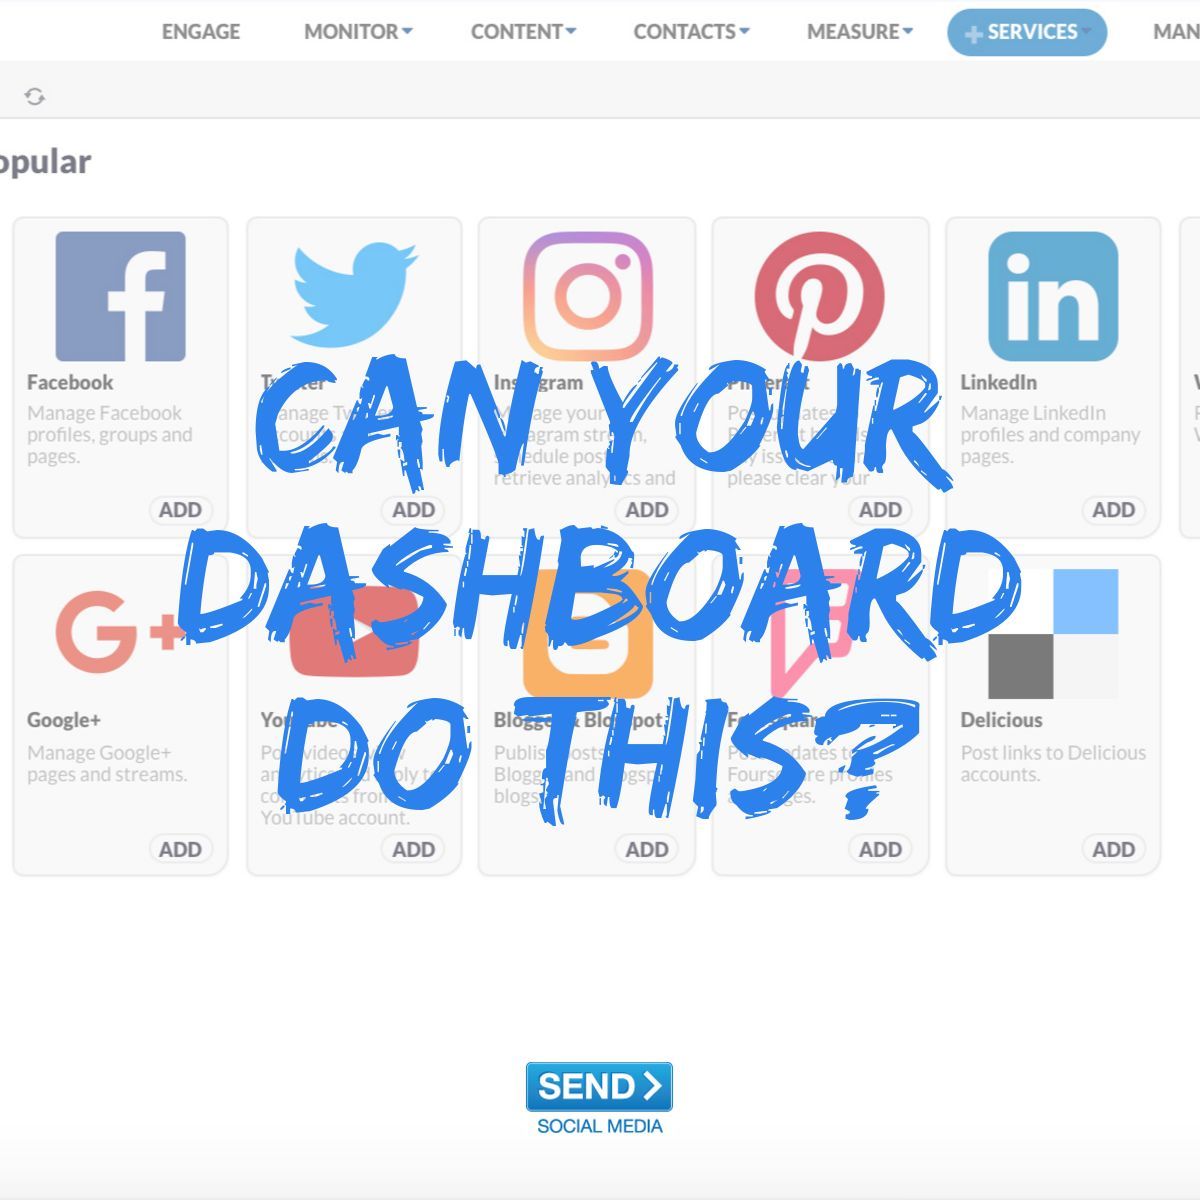 How the Right Social Media Marketing Dashboard Can Help Your Business Grow